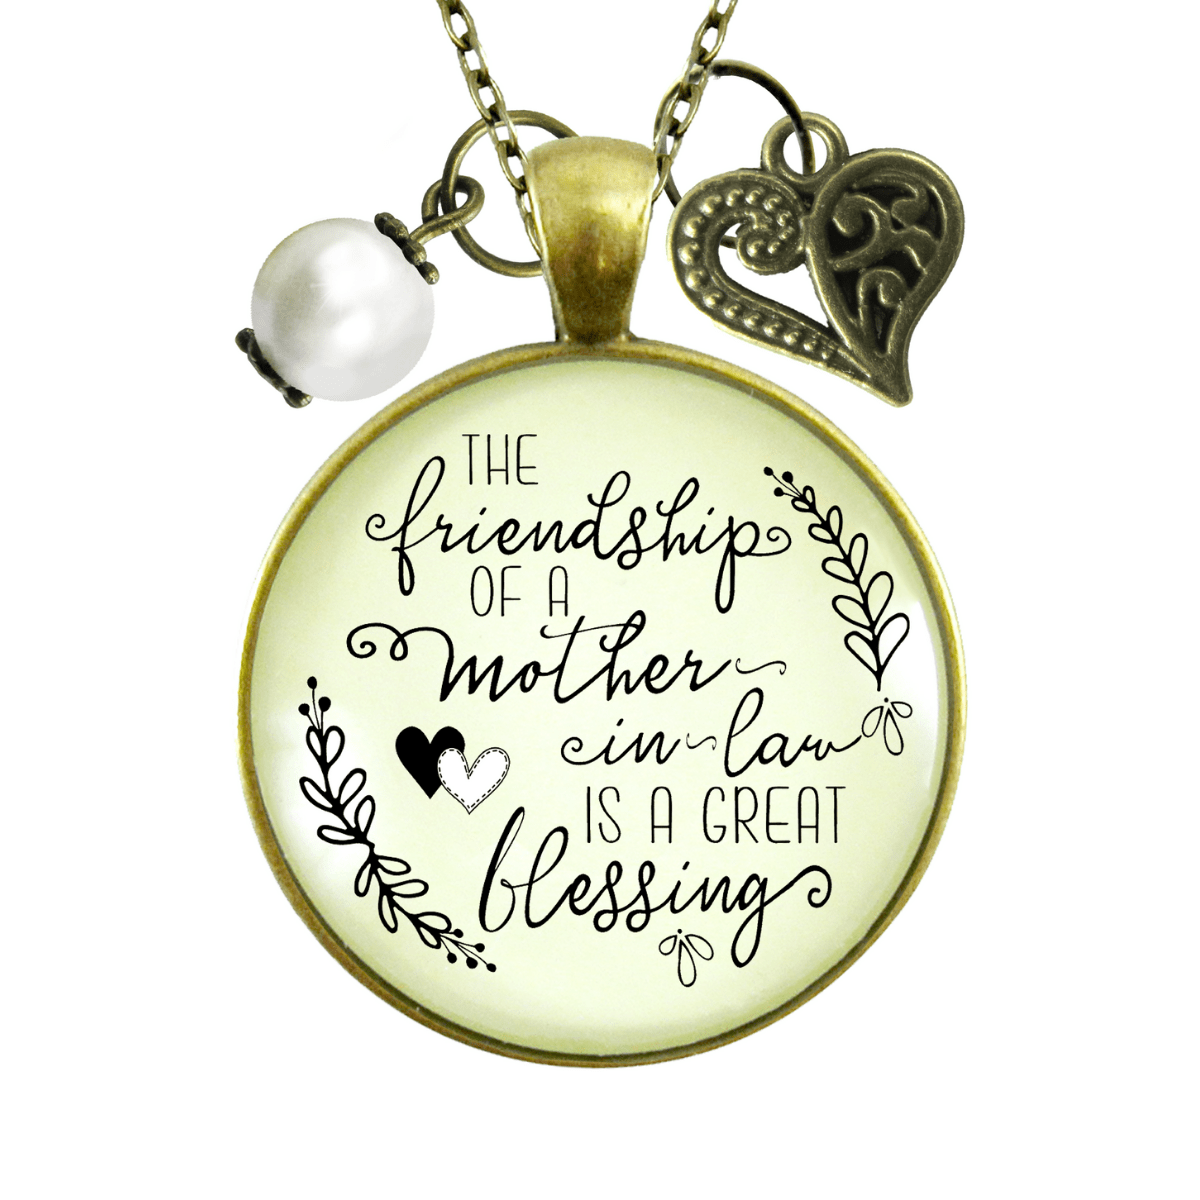 Gutsy Goodness Mother In Law Necklace Friendship Blessing Gift Meanful New Mom Wedding Jewelry - Gutsy Goodness Handmade Jewelry;Mother In Law Necklace Friendship Blessing Gift Meanful New Mom Wedding Jewelry - Gutsy Goodness Handmade Jewelry Gifts